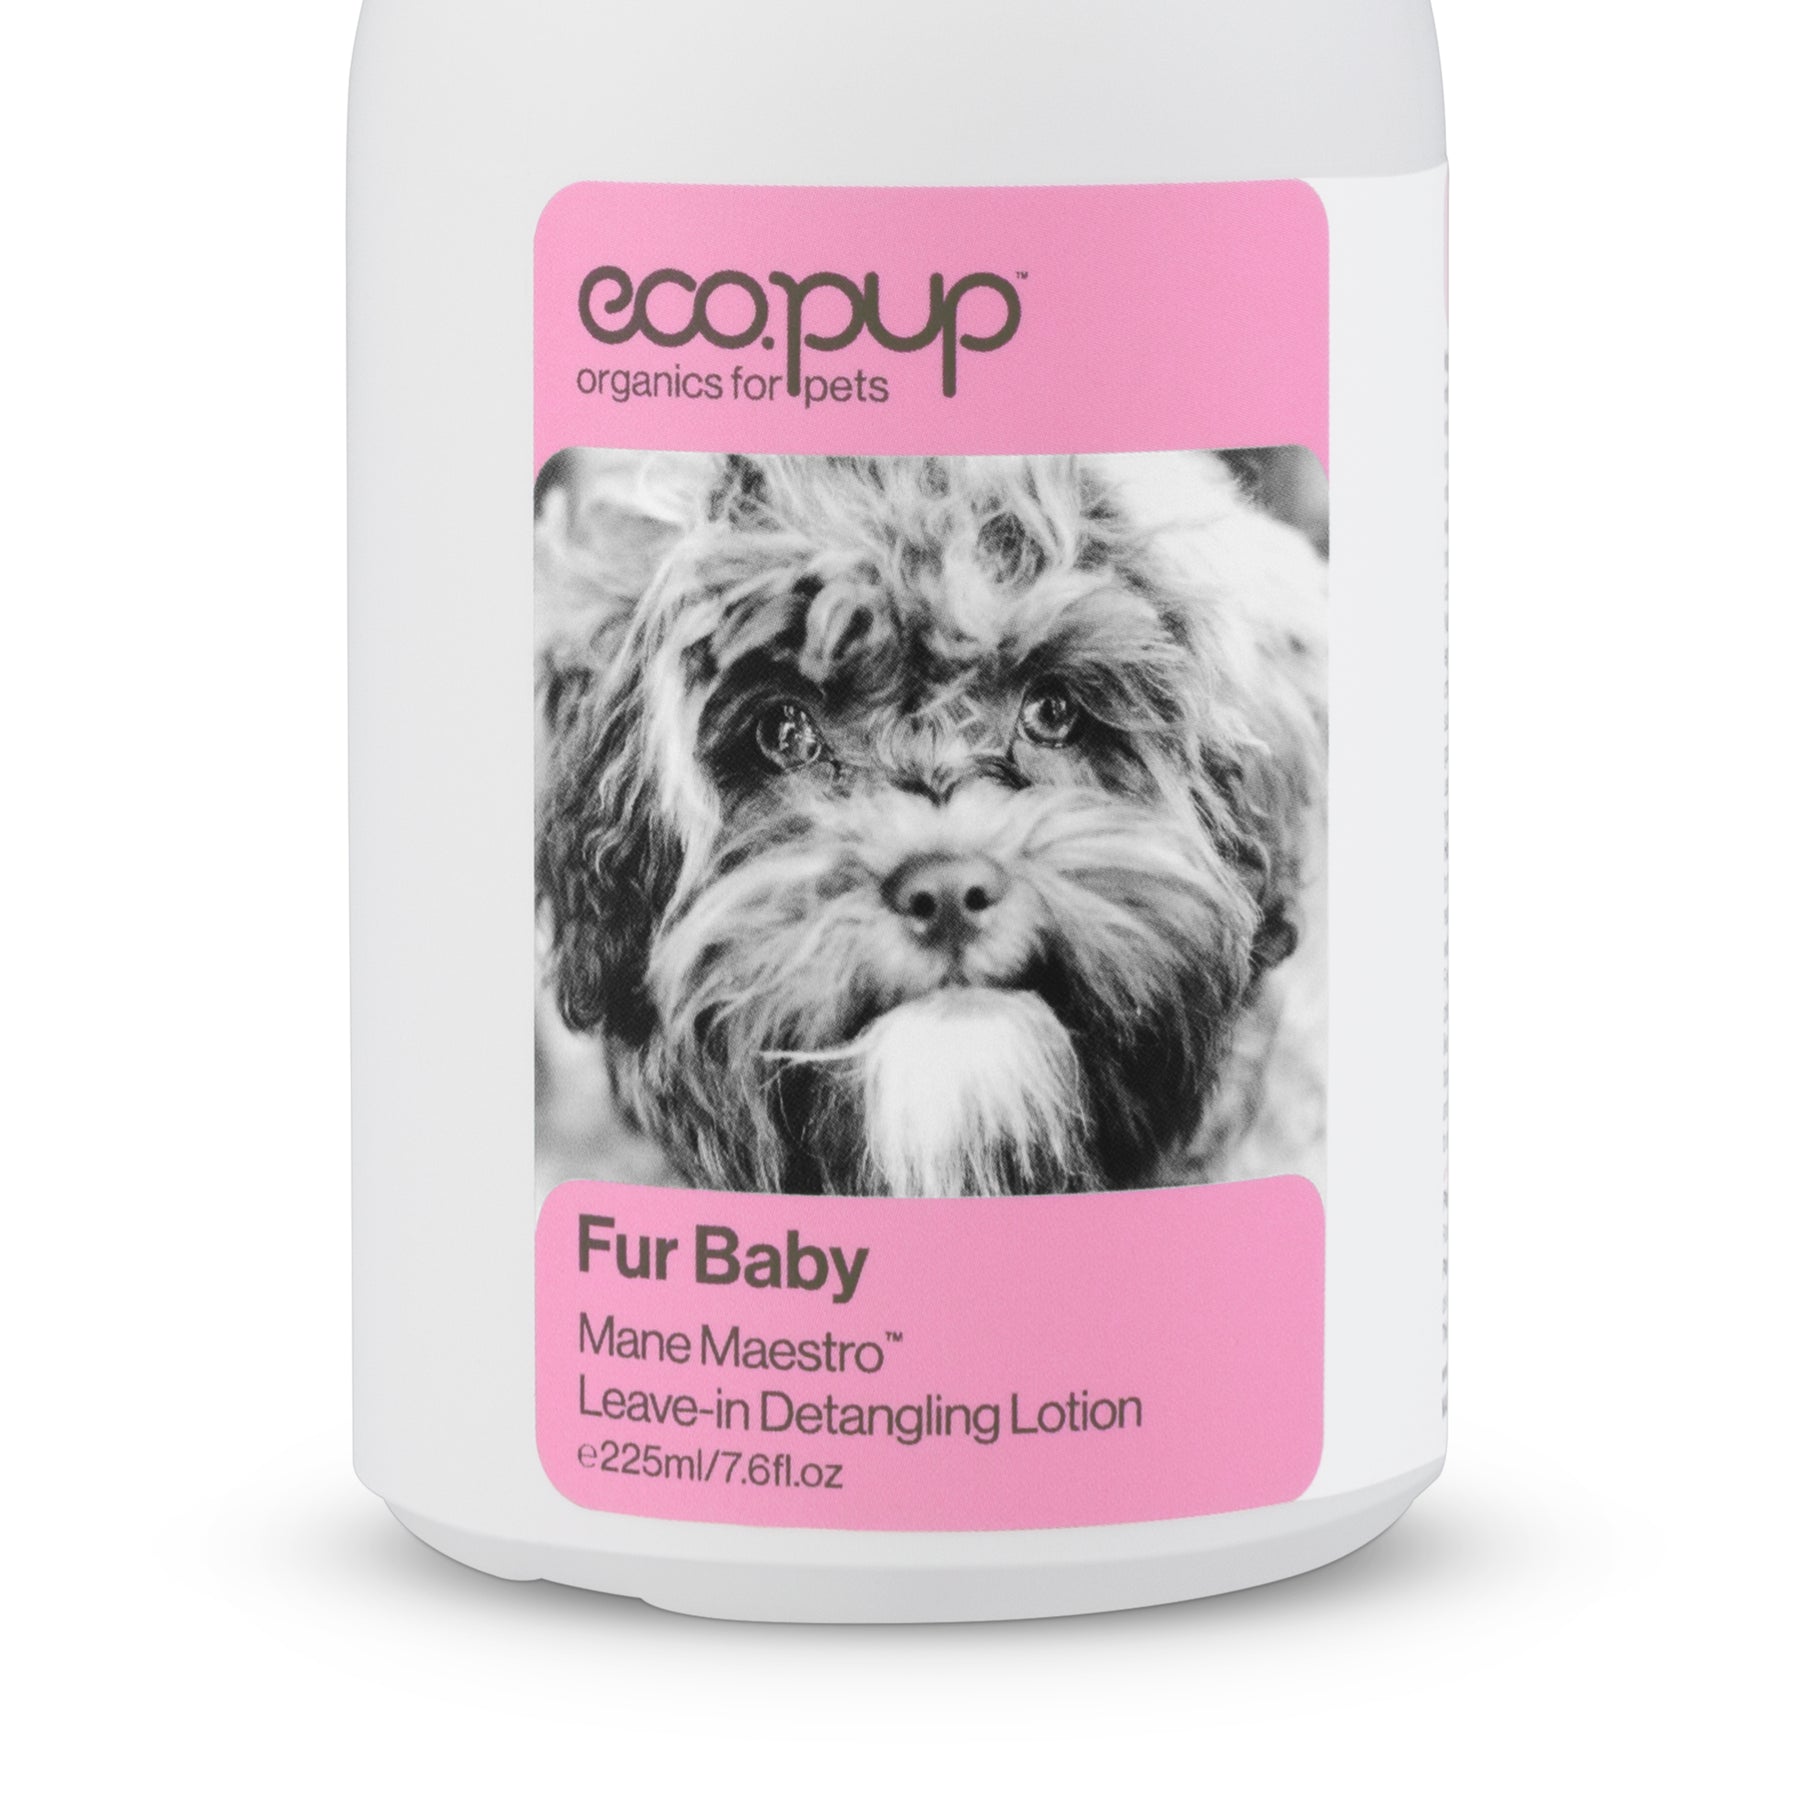 eco.pup Fur Baby Mane Maestro Leave-in Detangling Lotion